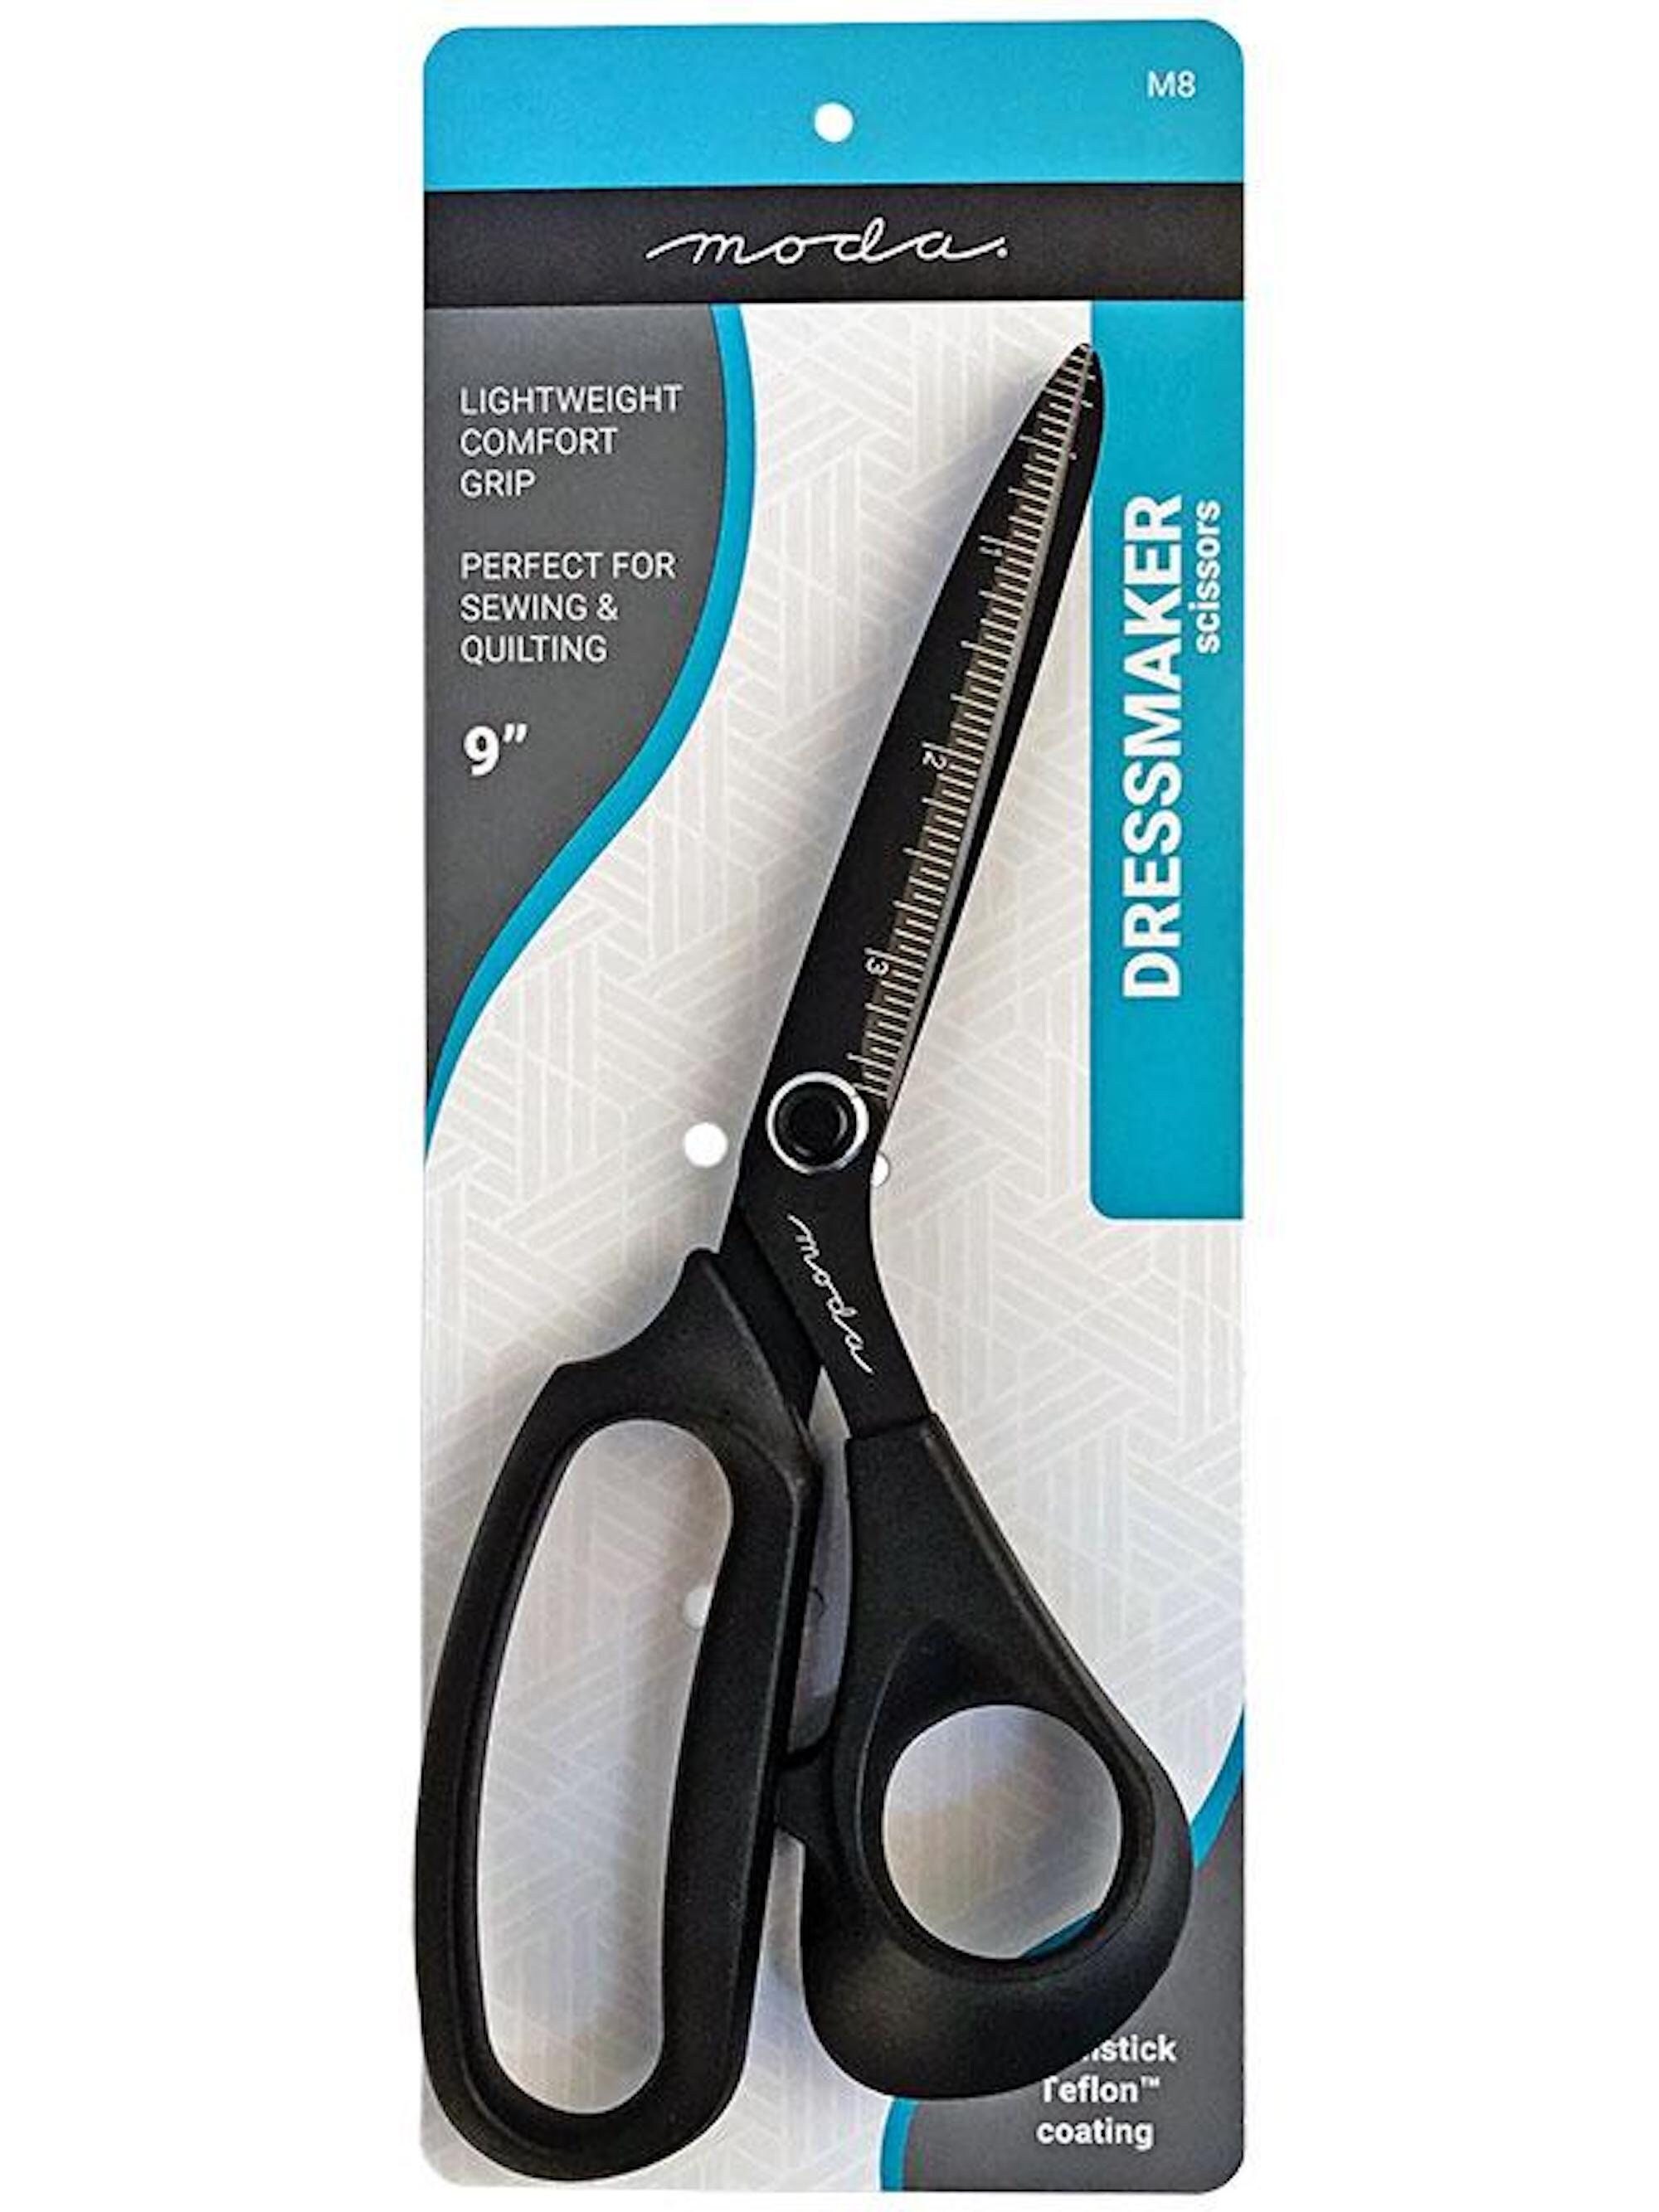 Professional Sewing Scissors and Thread Cutter - Stainless Steel